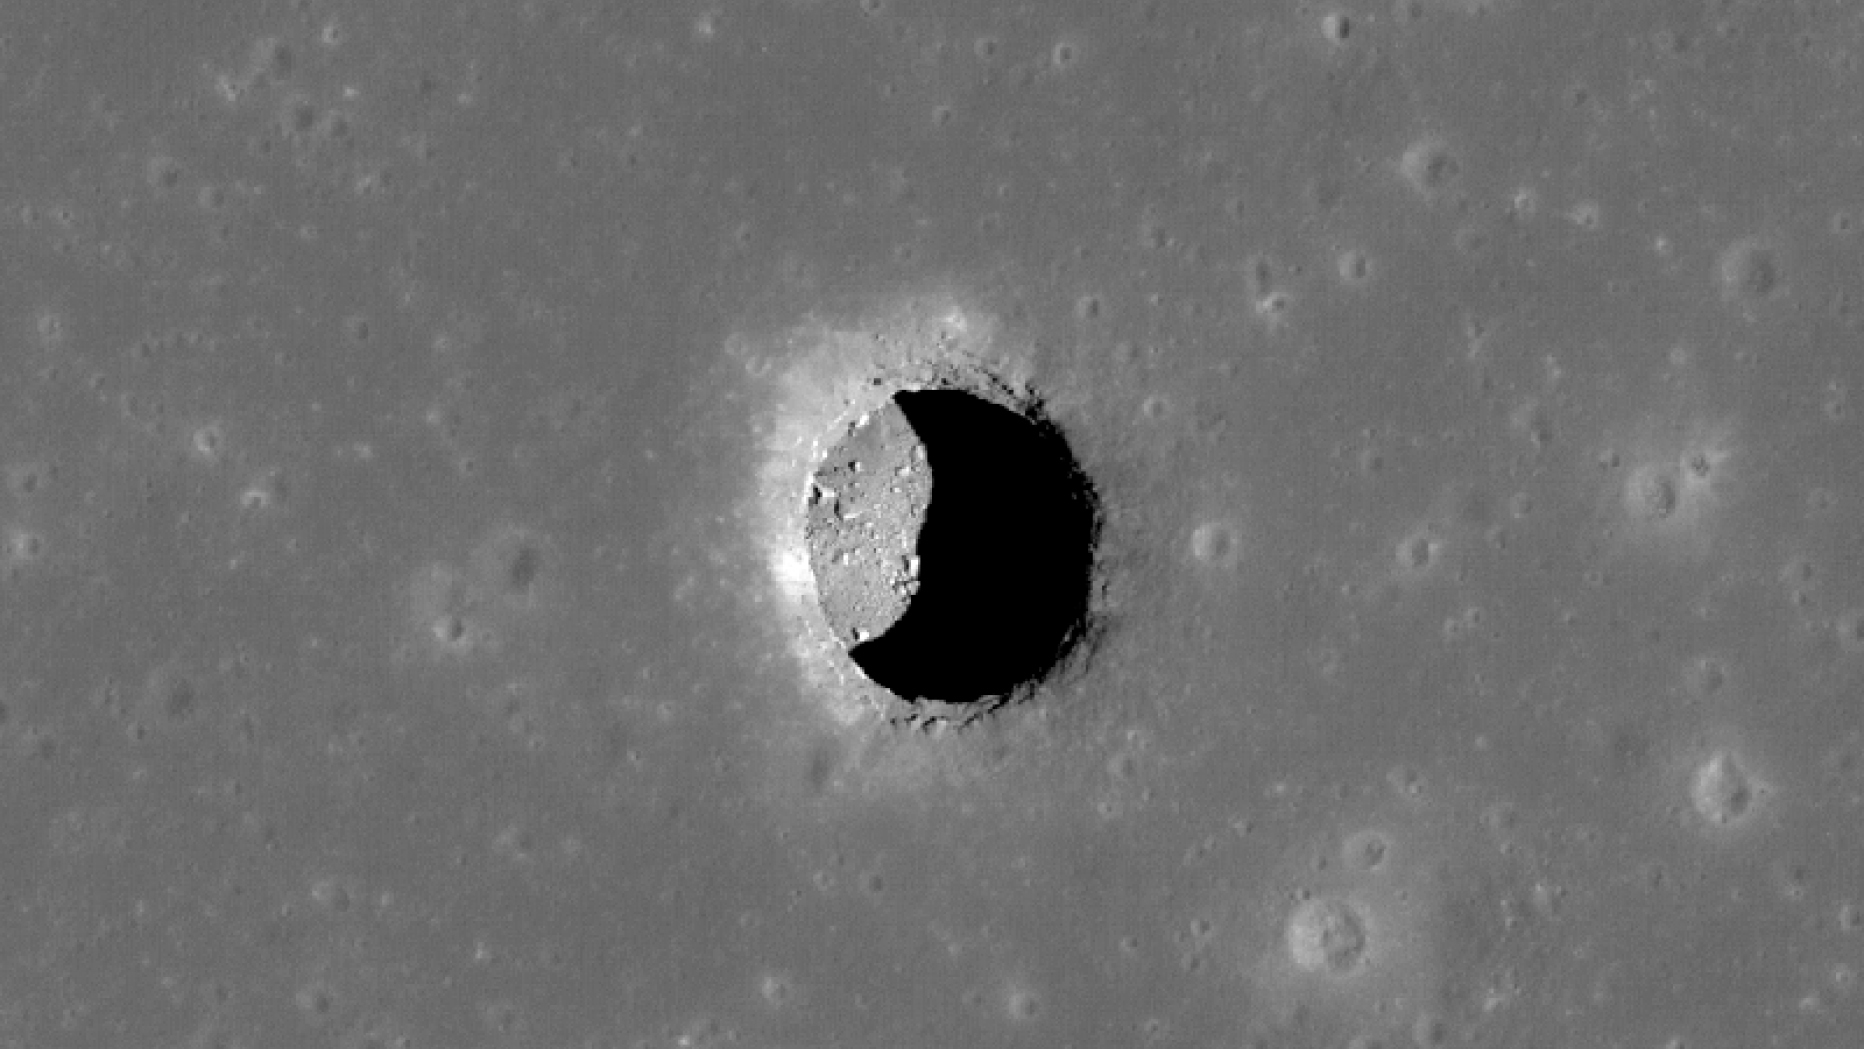 NASA has found caves on the Moon with a comfortable temperature for life